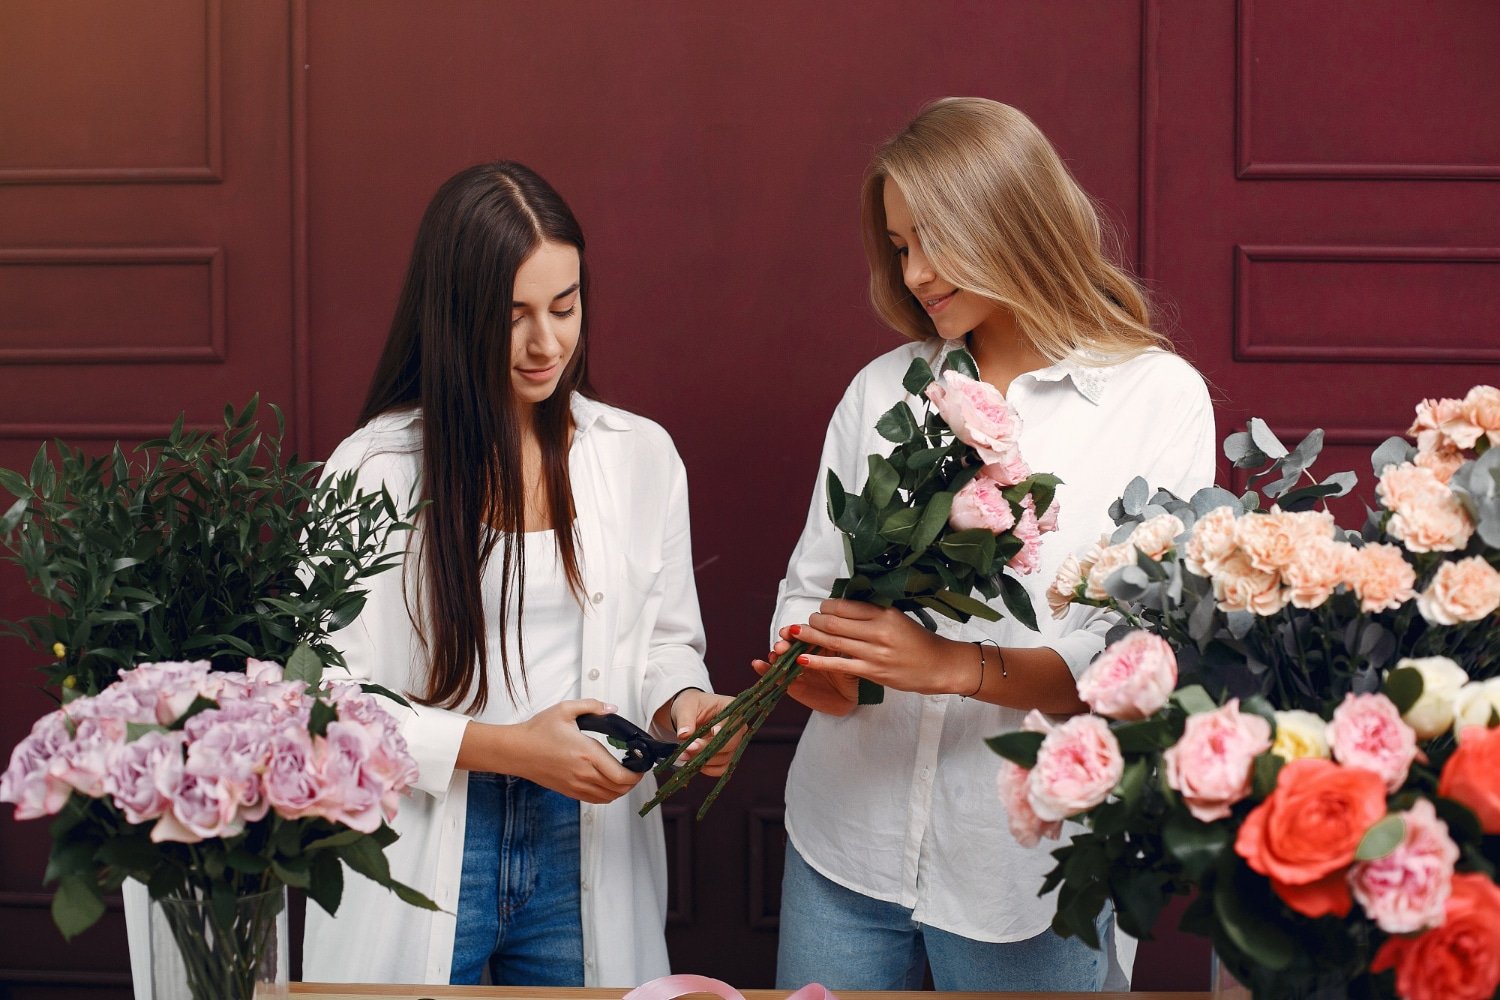 Floraly's Sustainable Flower Delivery Service